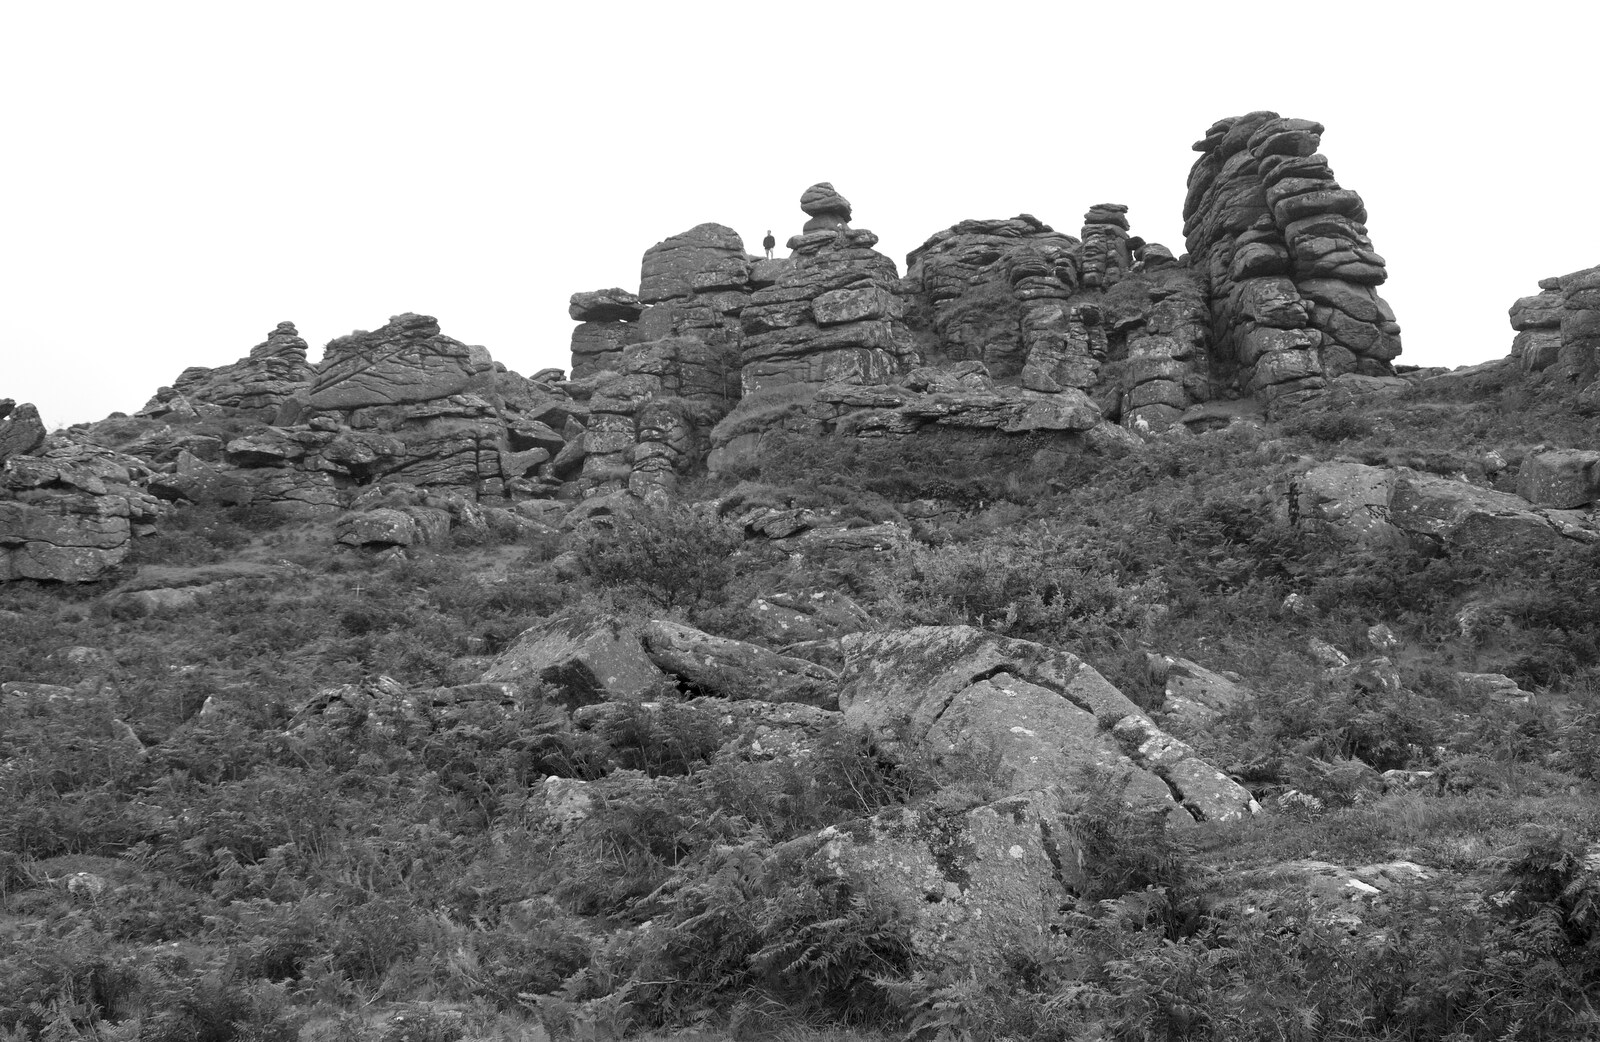 A solitary figure on the tor from A Walk up Hound Tor, Dartmoor, Devon - 24th August 2020